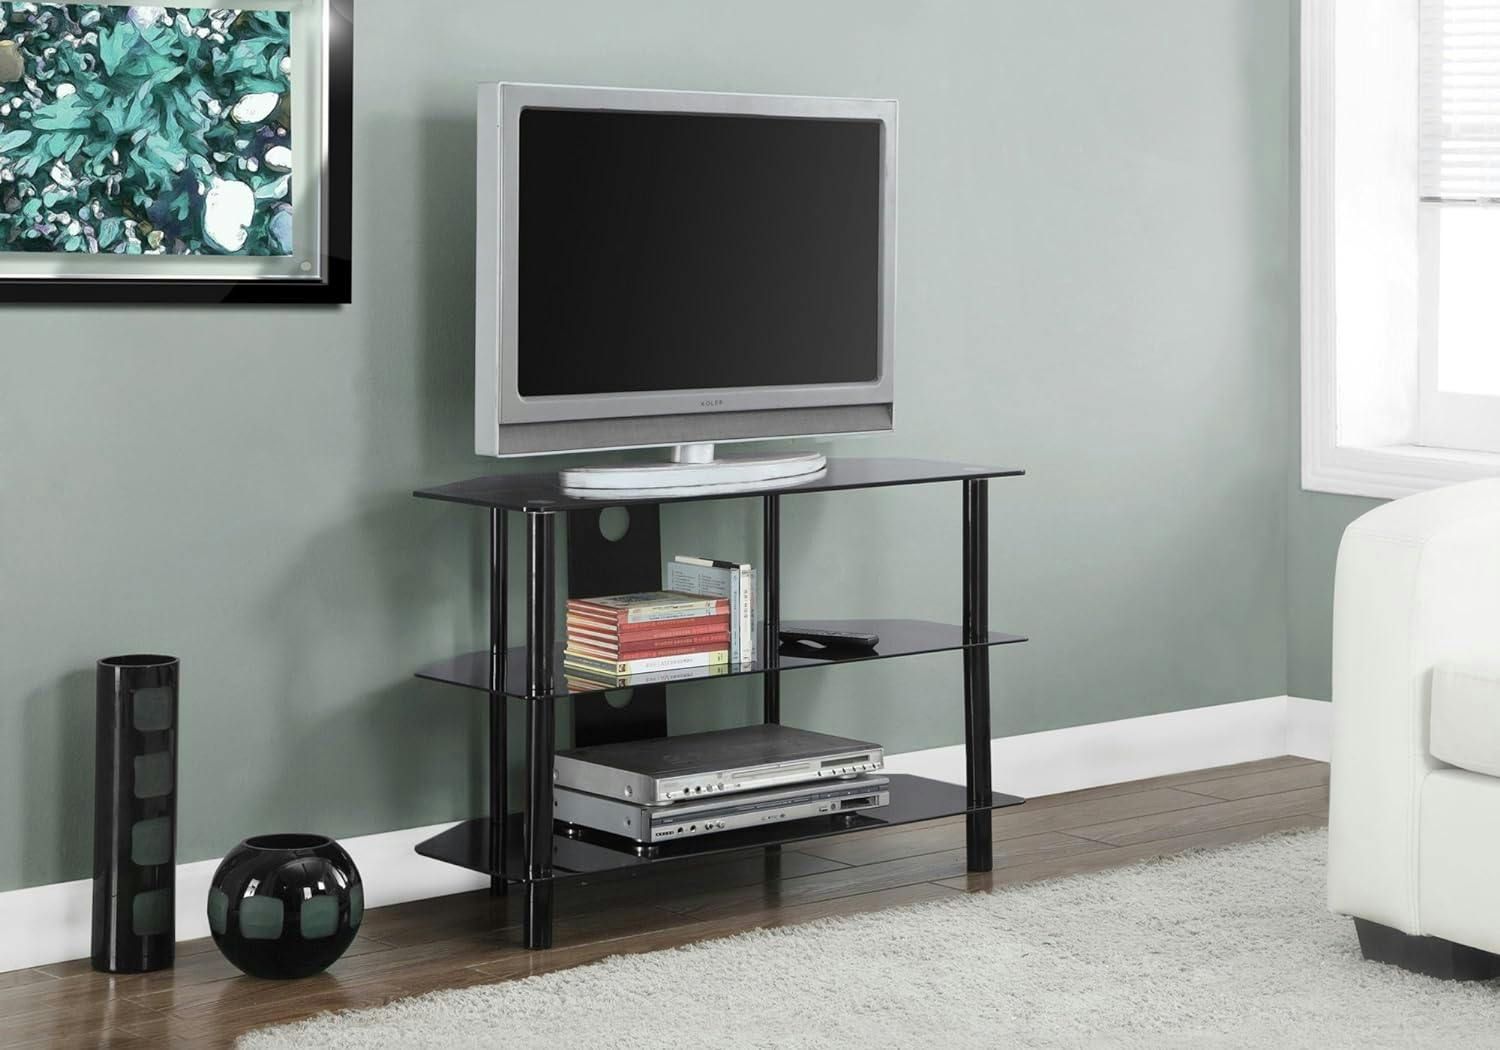 Sleek 36" Black Metal TV Stand with Tempered Glass Shelves